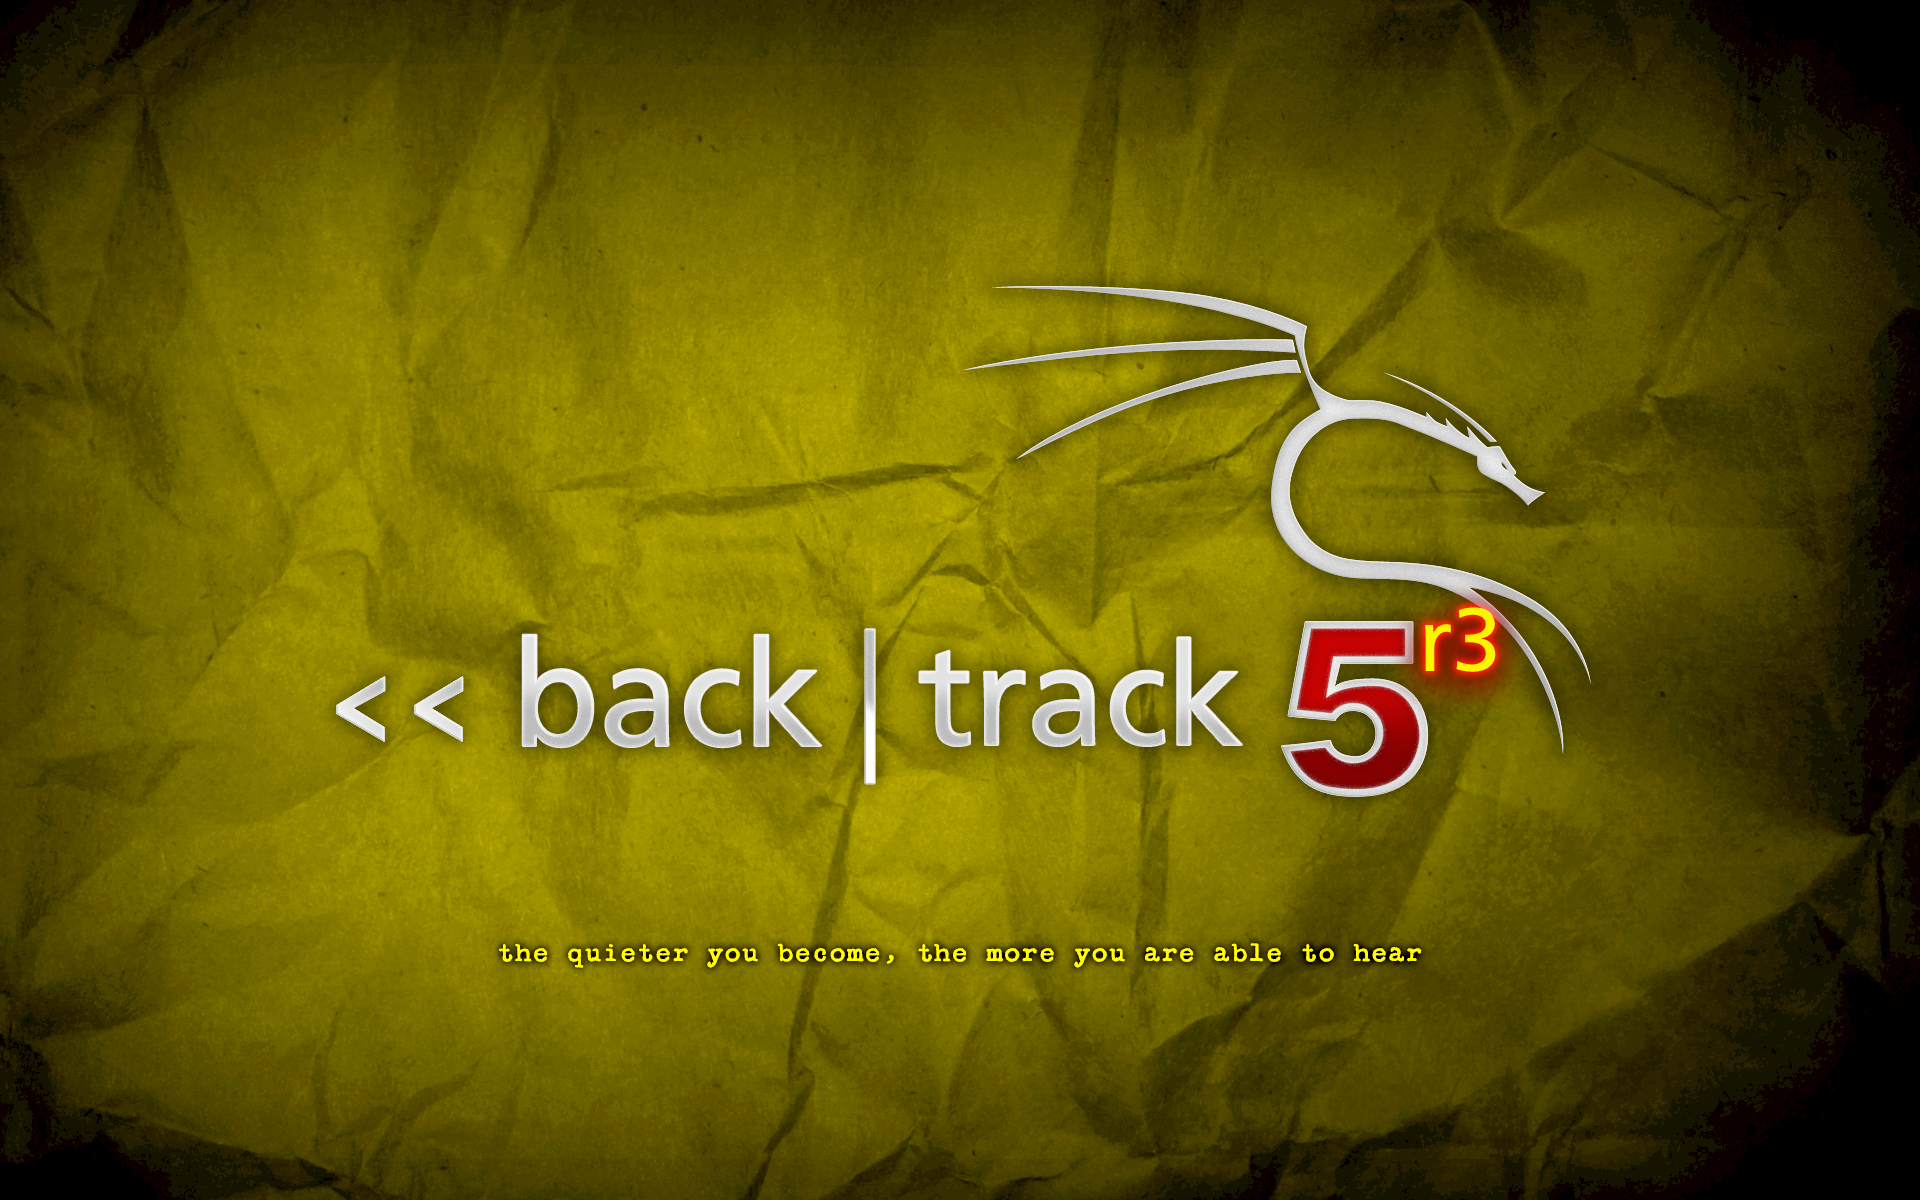 backtrack-5r3-yellow.png